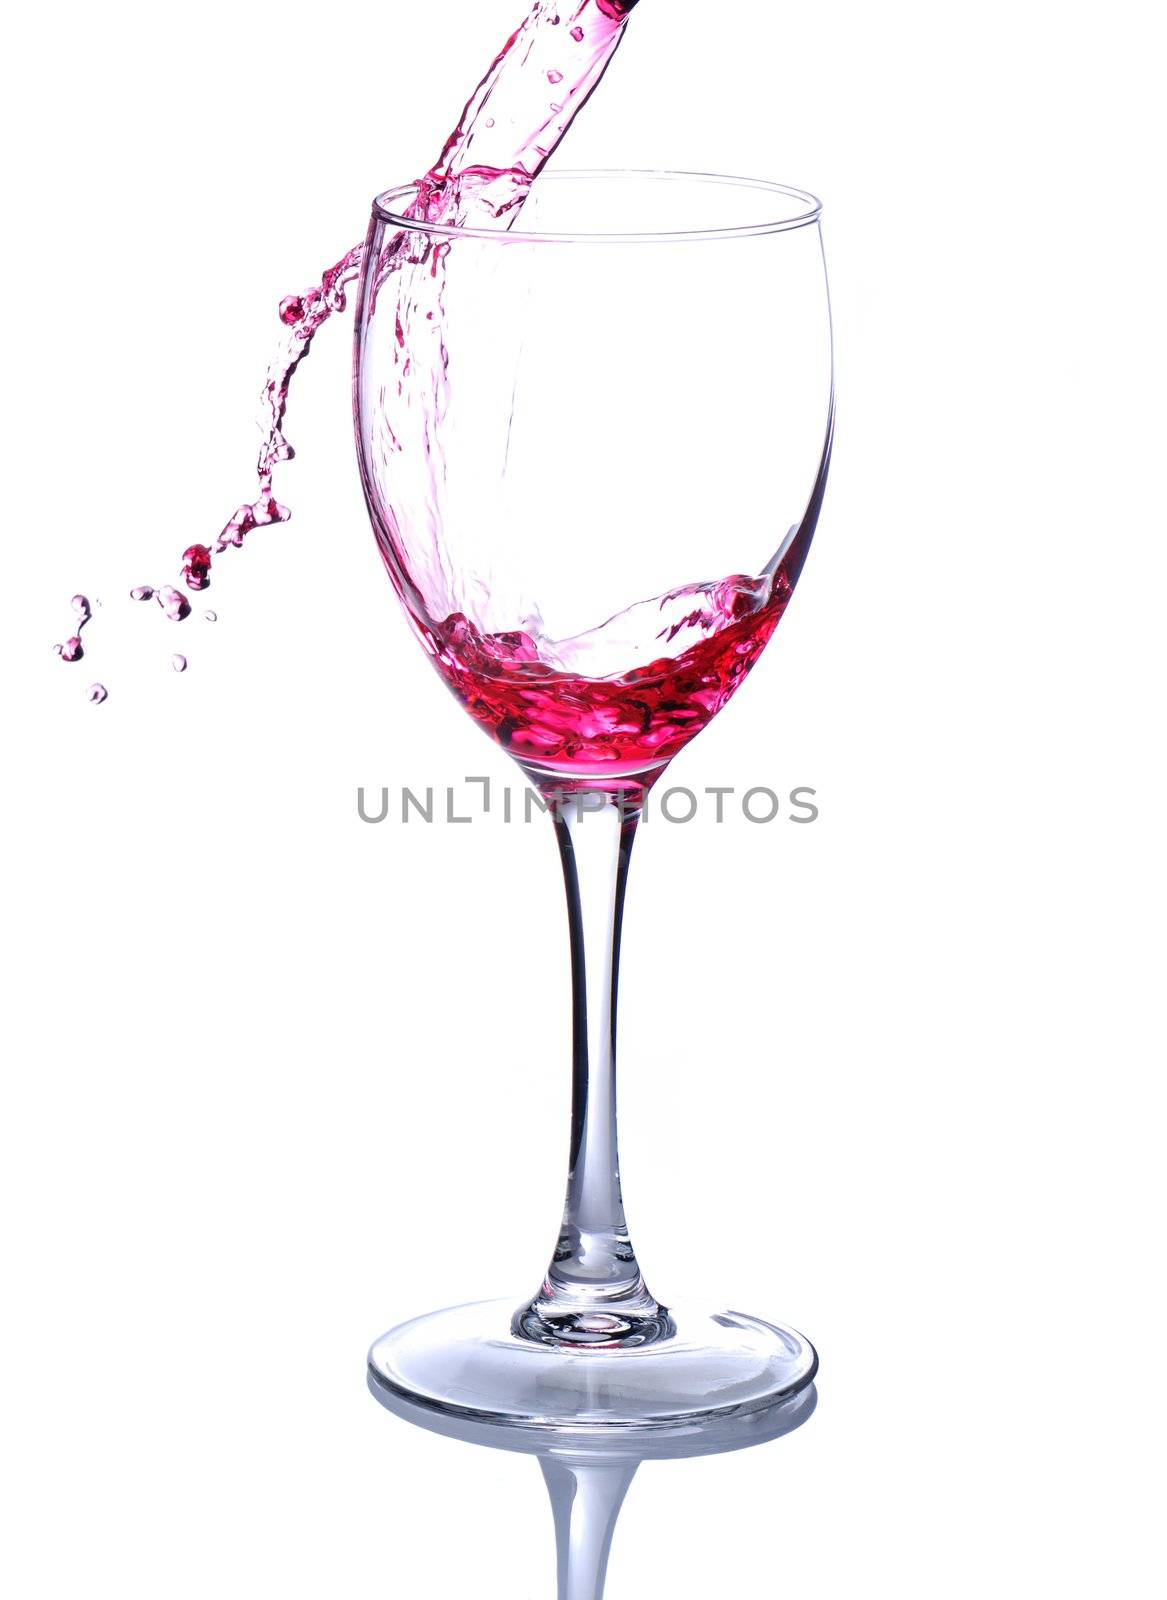 Pouring wine into a glass